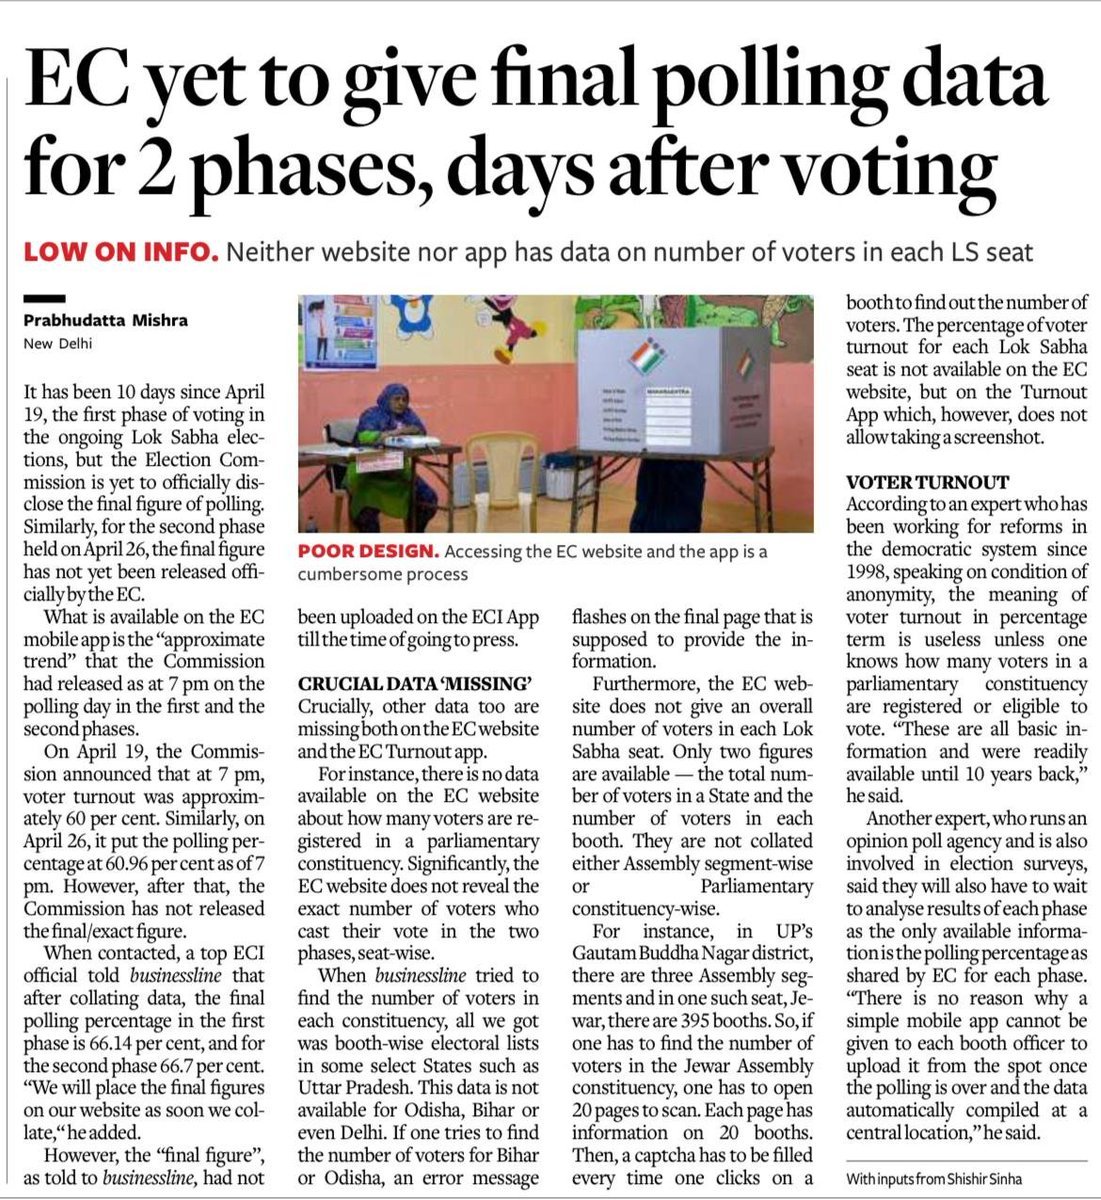 People are concerned about the Election Commission's delay in publishing the voter turnout percentage. Why the rush? Voting is ongoing; let them finish. Once enough votes are garnered for the BJP to secure victory, they will announce the final percentage. Right @ECISVEEP?